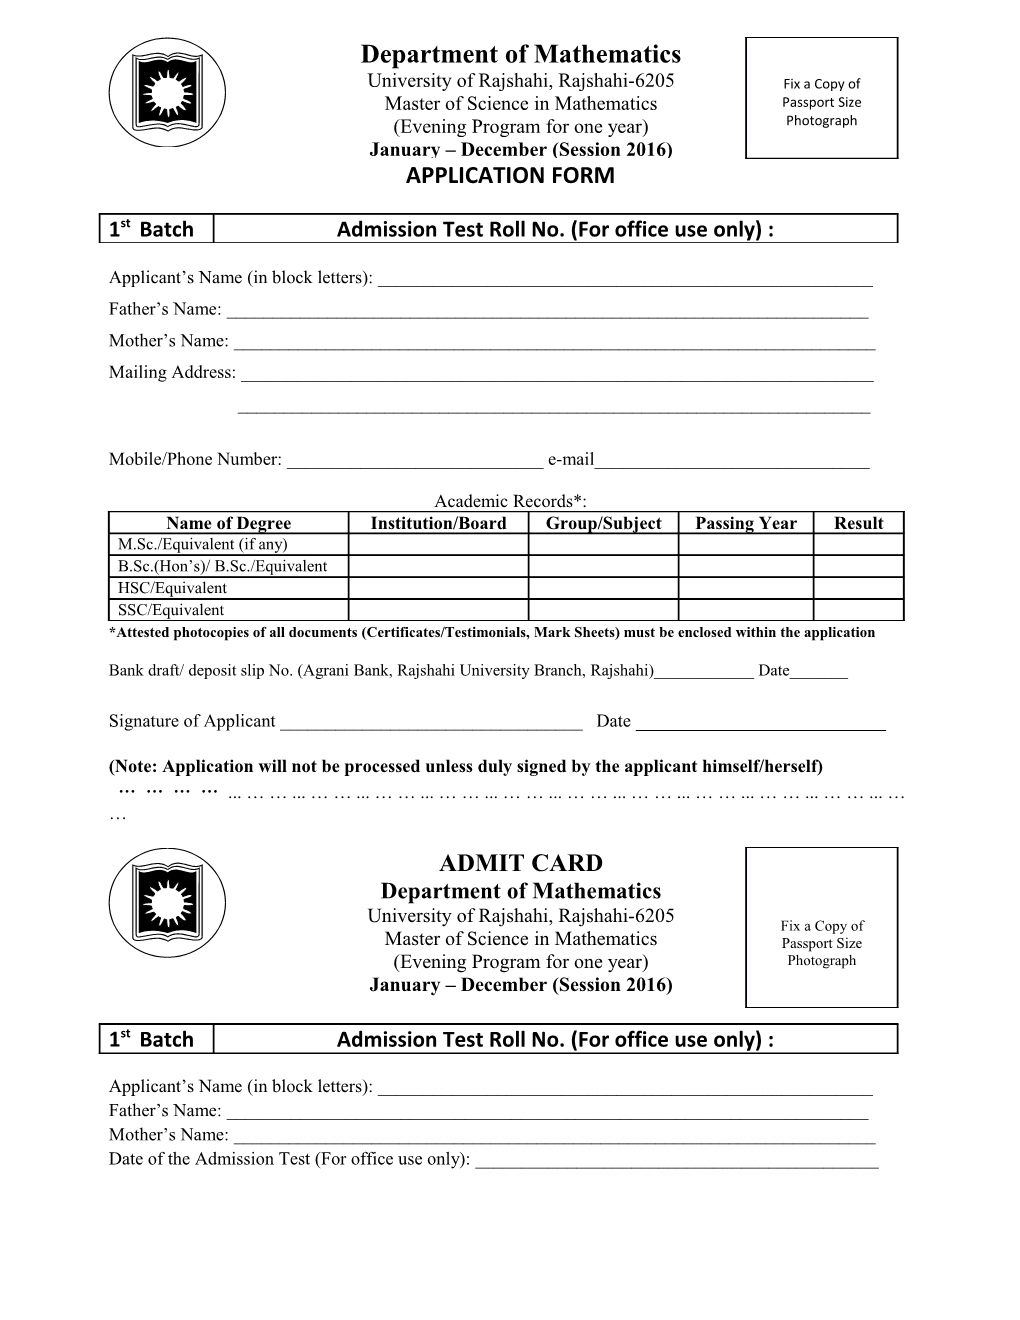 Application Form s20